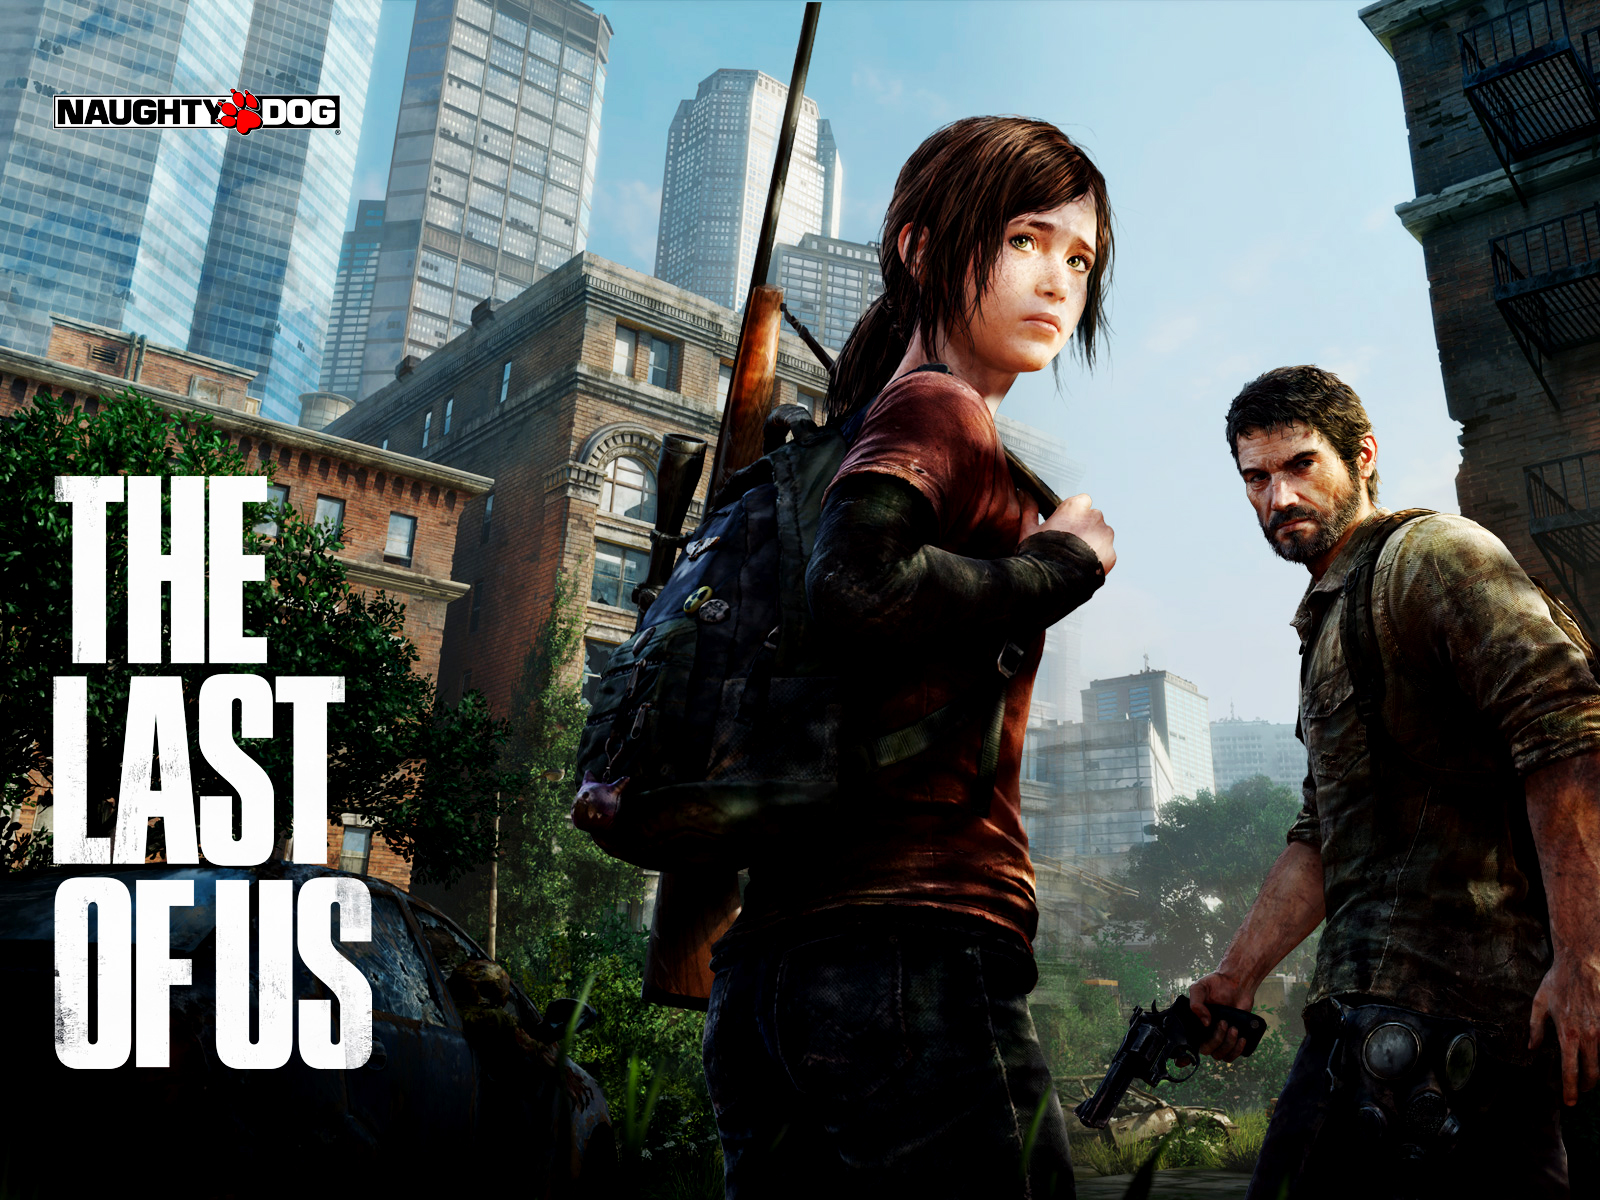 THE LAST OF US HD WALLPAPERS For Windows 7   XP   Vista pictures